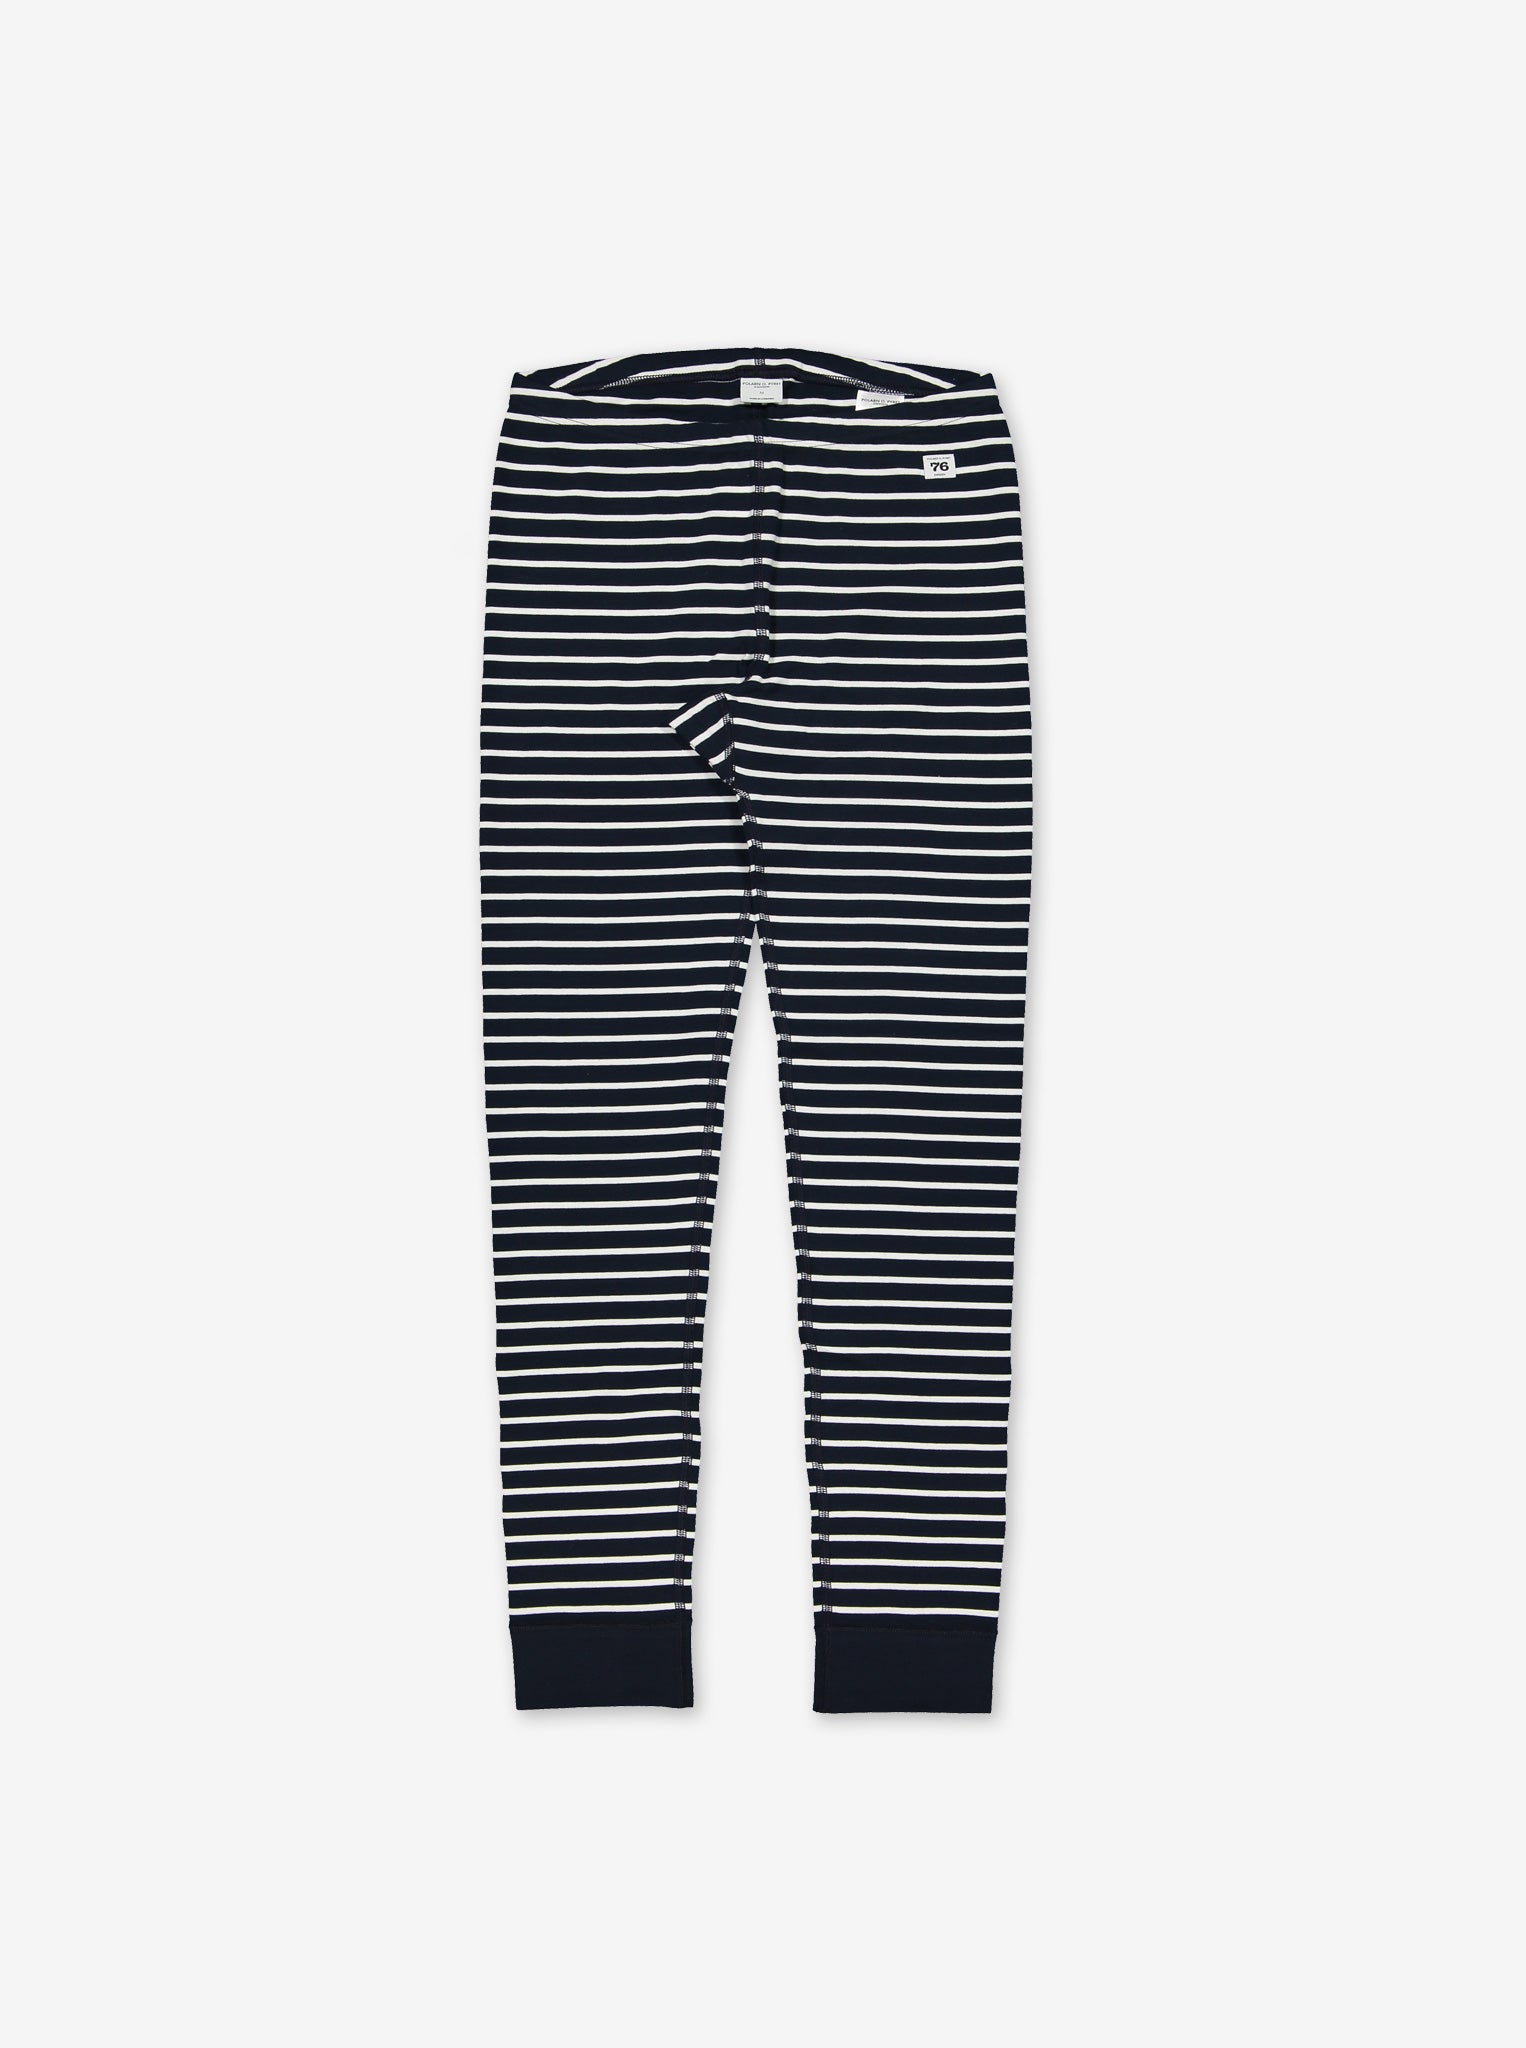  PO.P classic navy and white unisex adult leggings in organic cotton